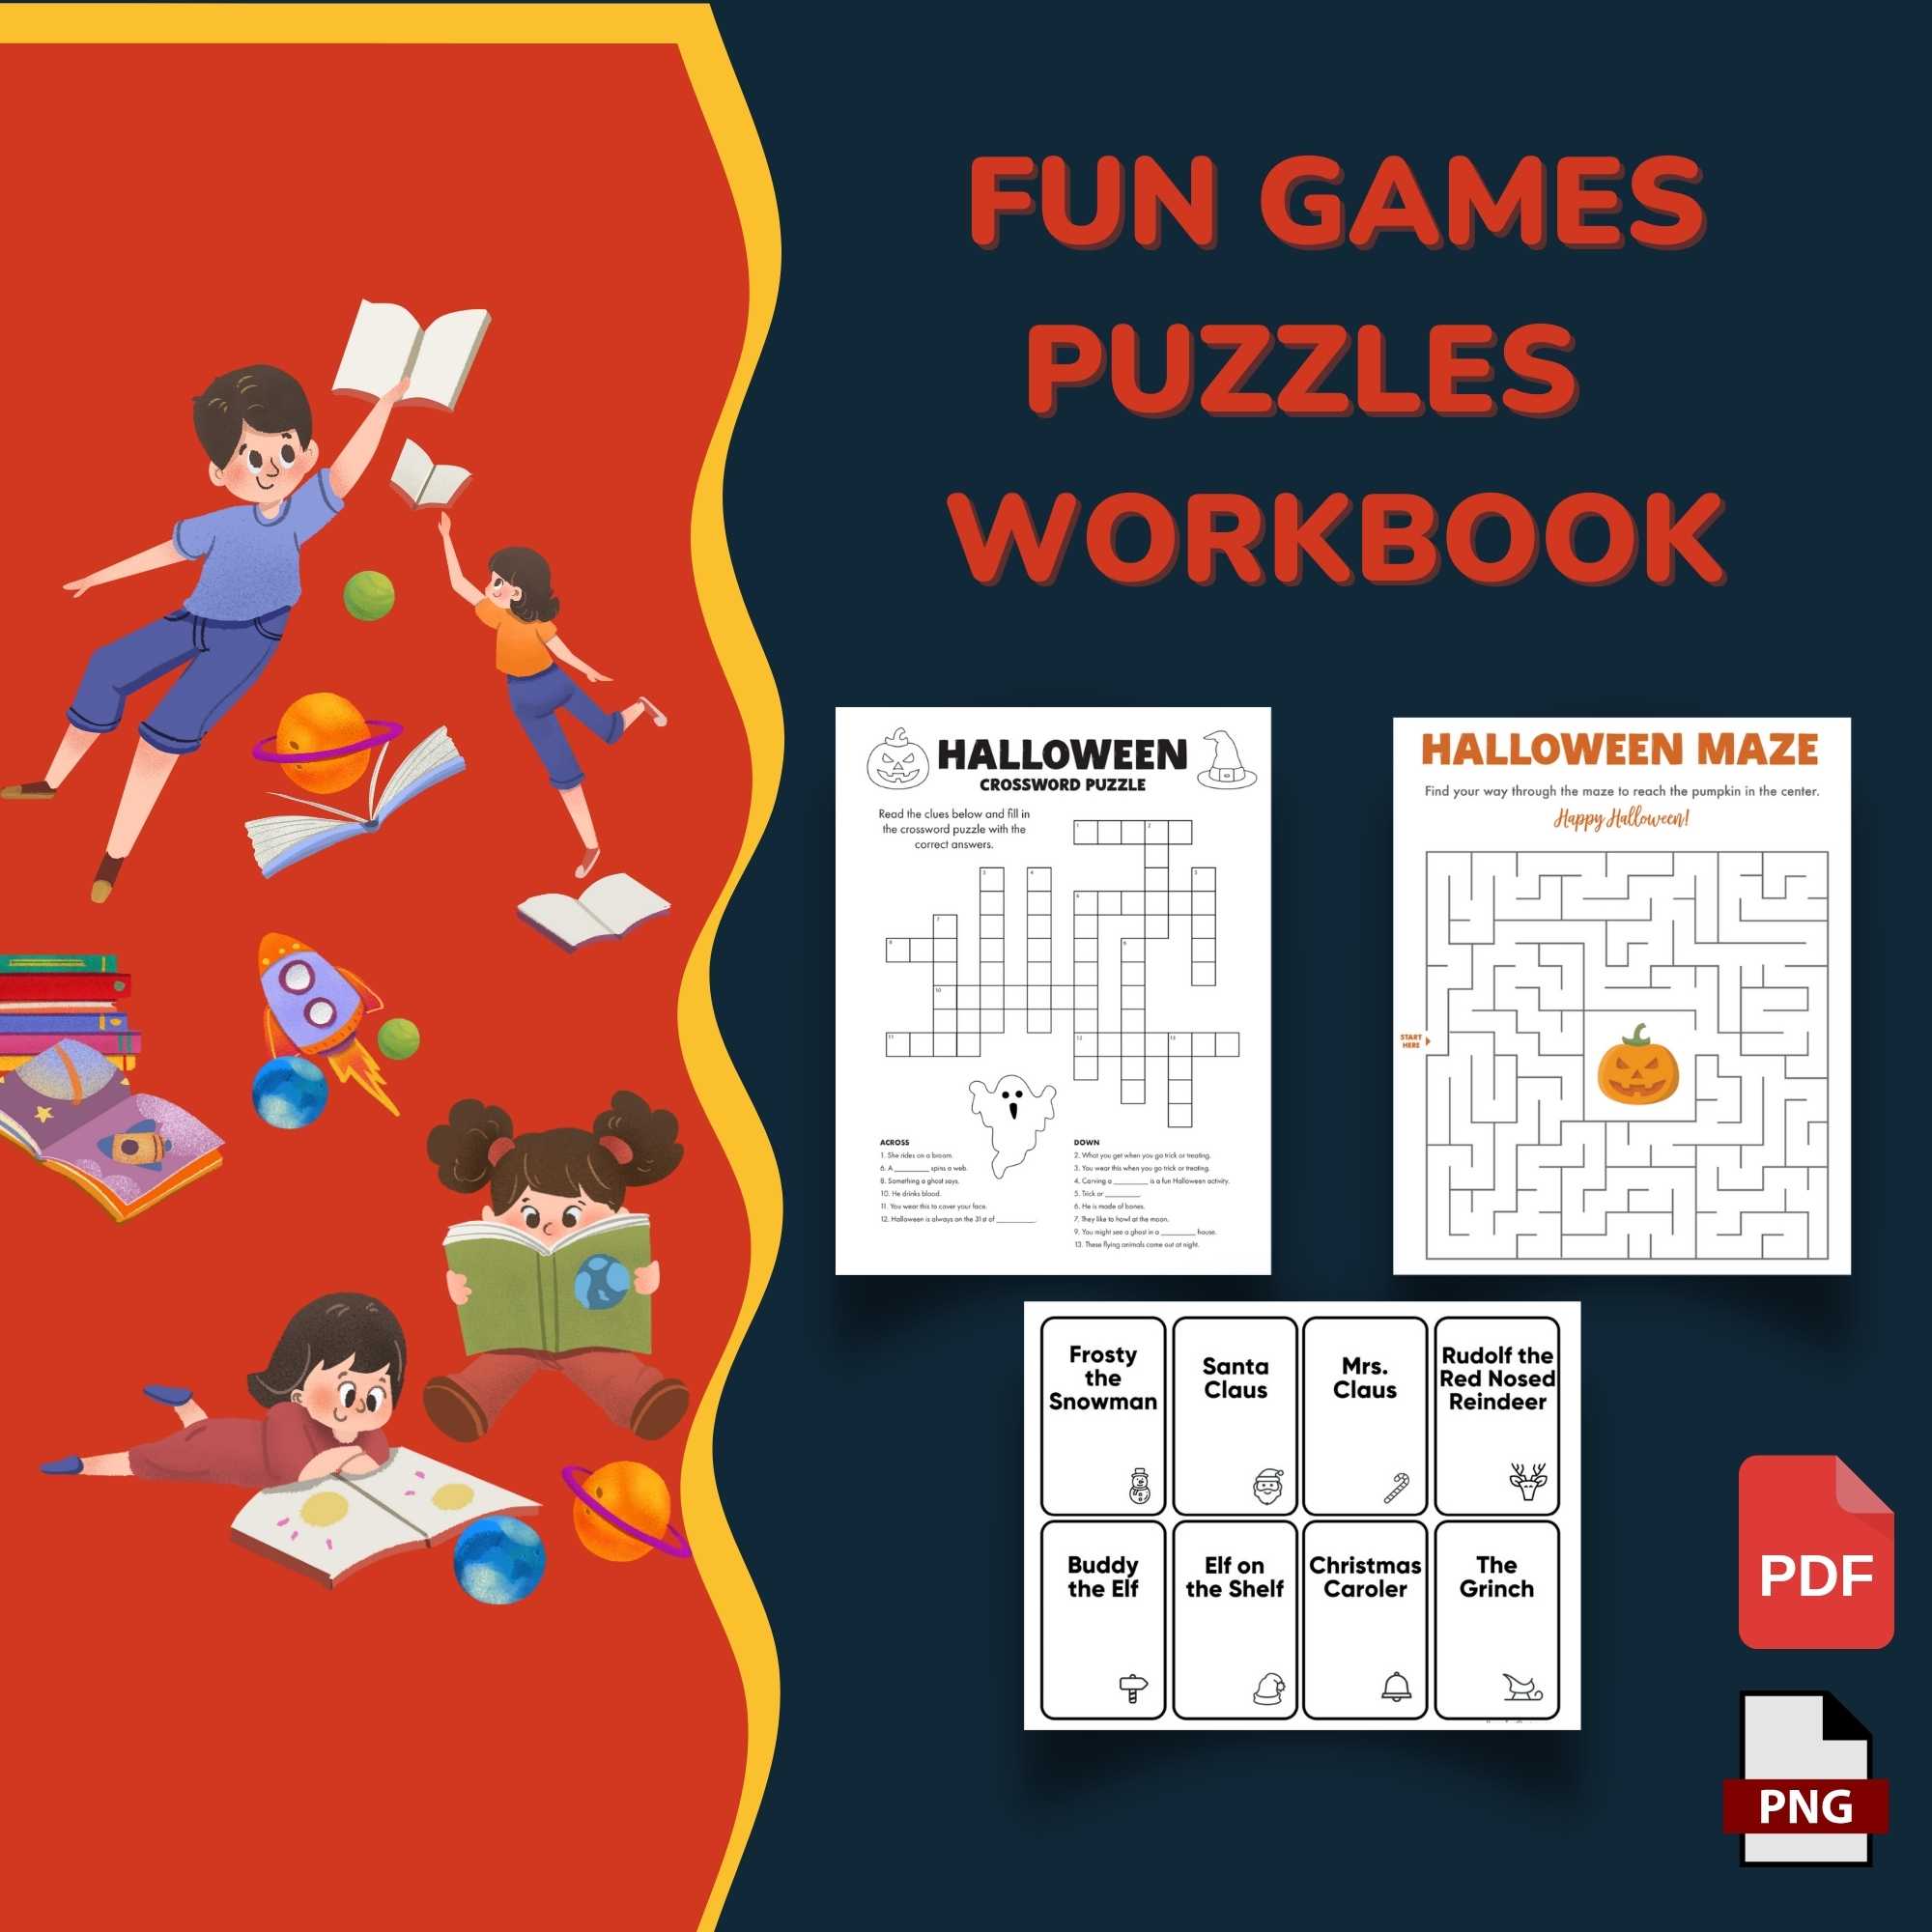 Fun End of Year Activities Games Puzzles Workbook preview image.